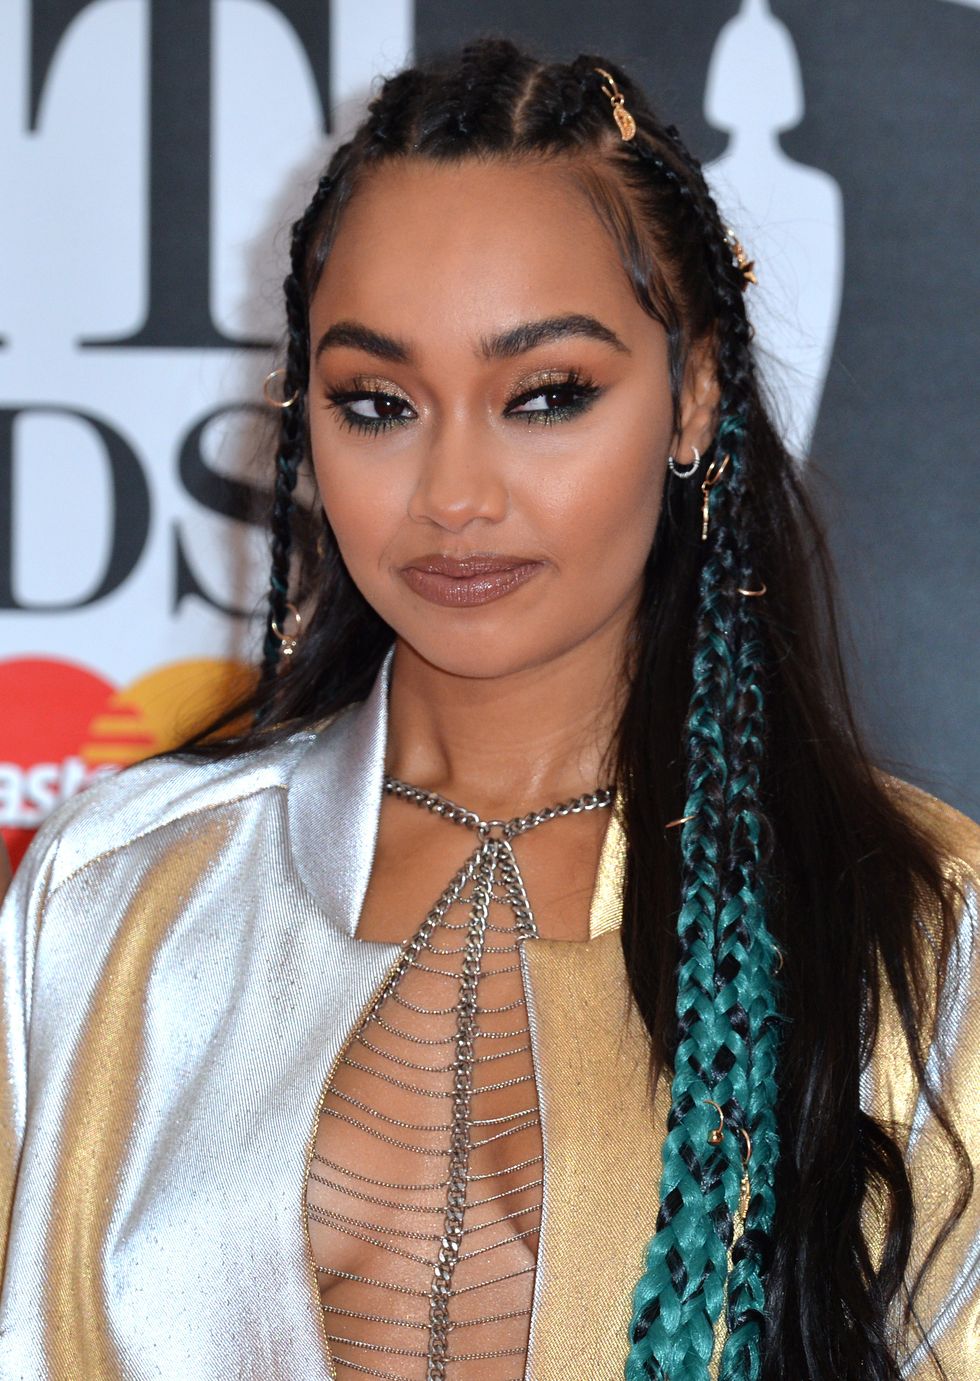 Leigh-Anne Pinnock attends the BRIT Awards 2016